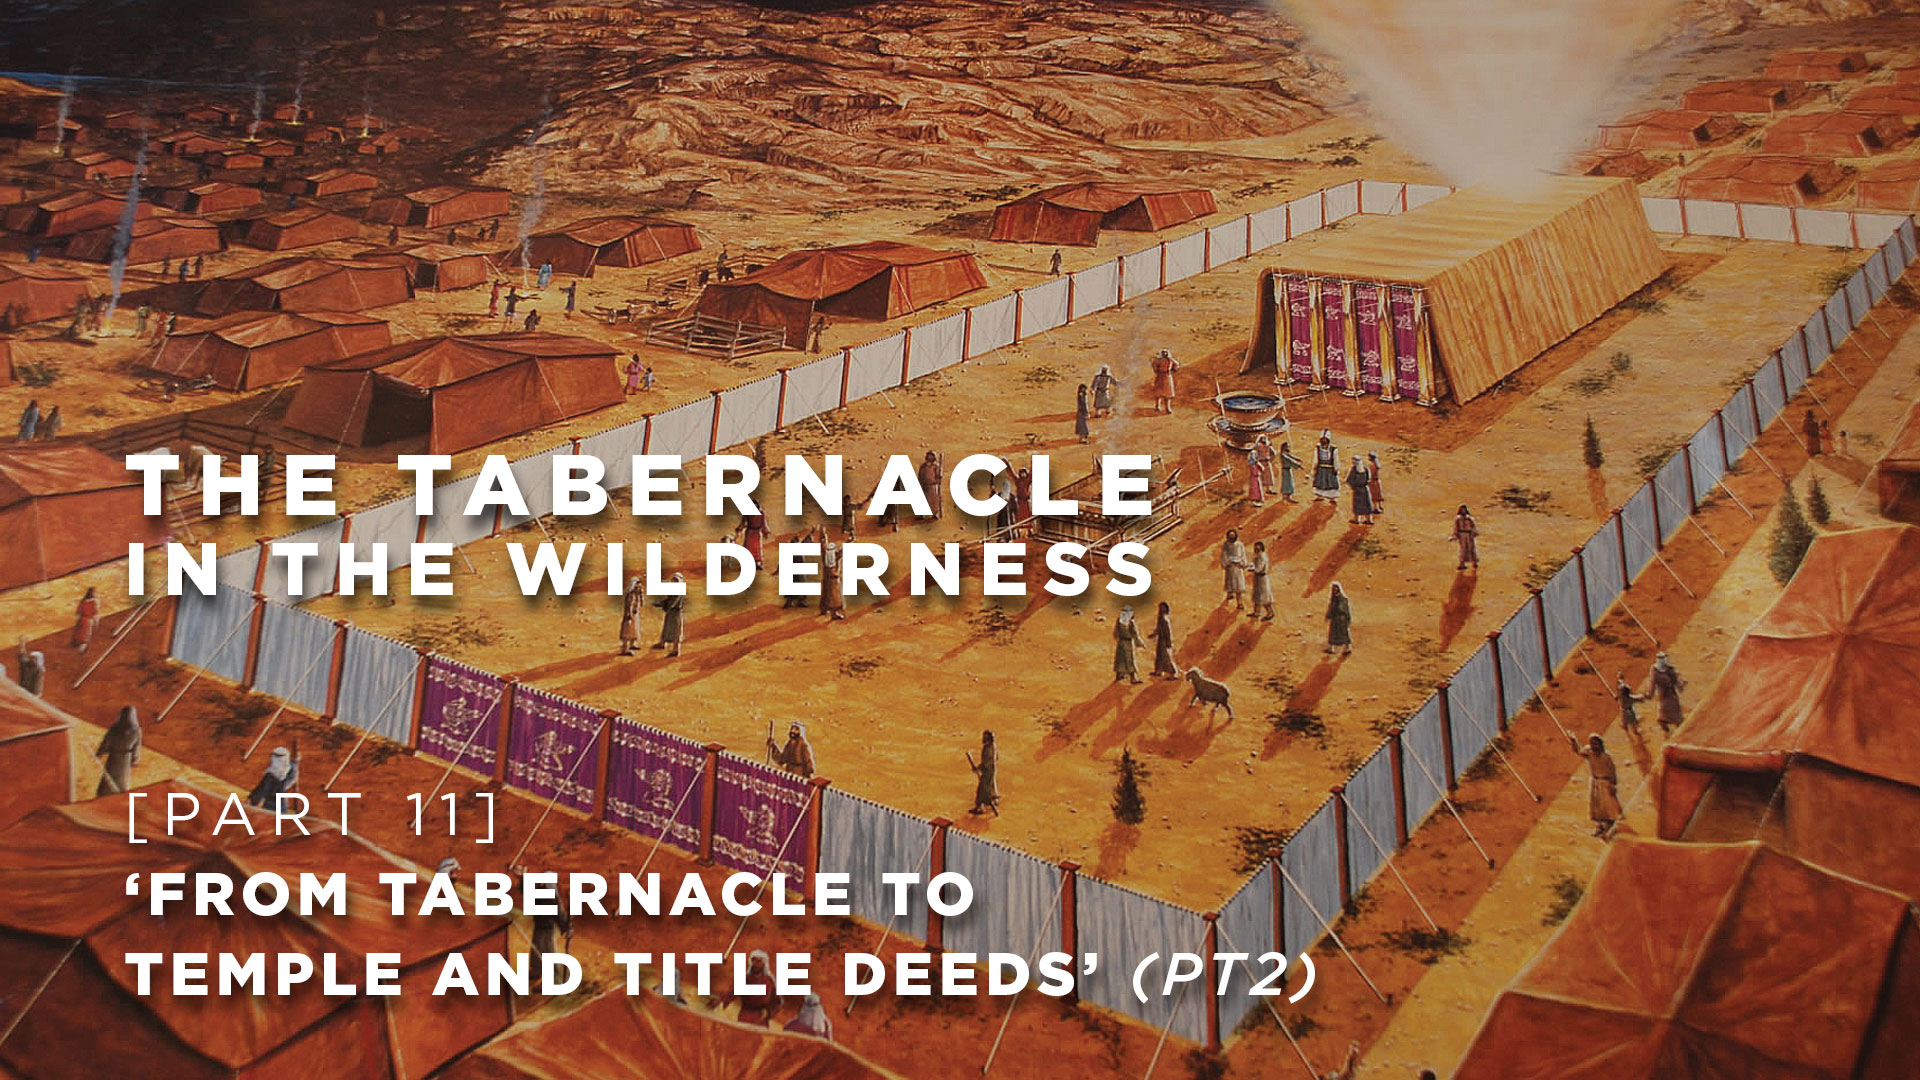 Part 11 - Tabernacle To Temple And Title Deeds (Part 2)